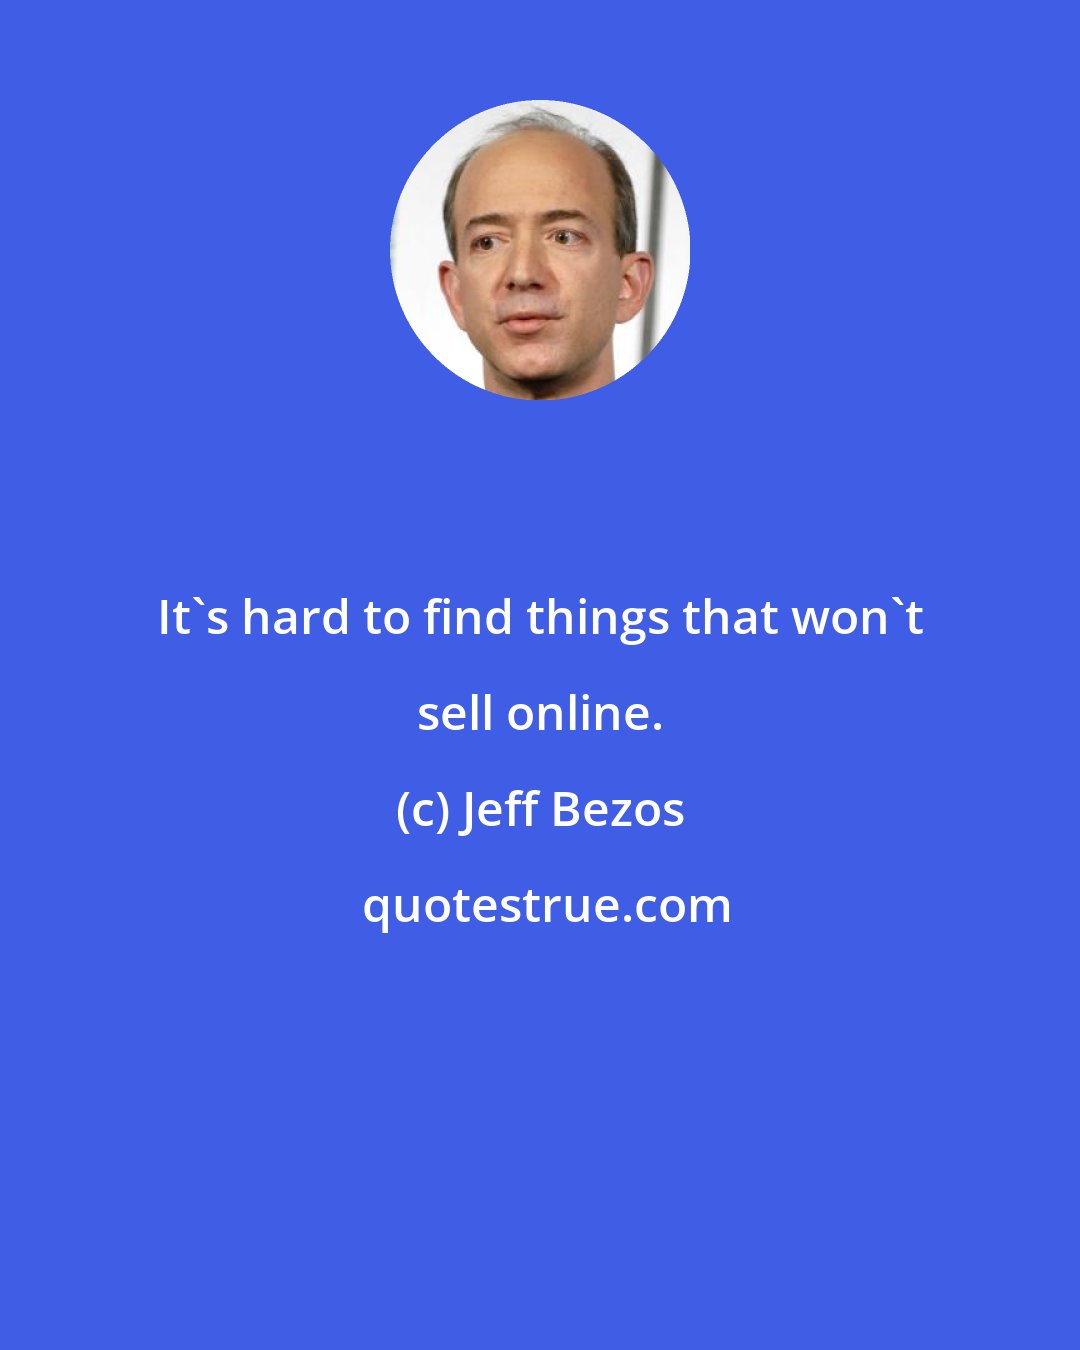 Jeff Bezos: It's hard to find things that won't sell online.